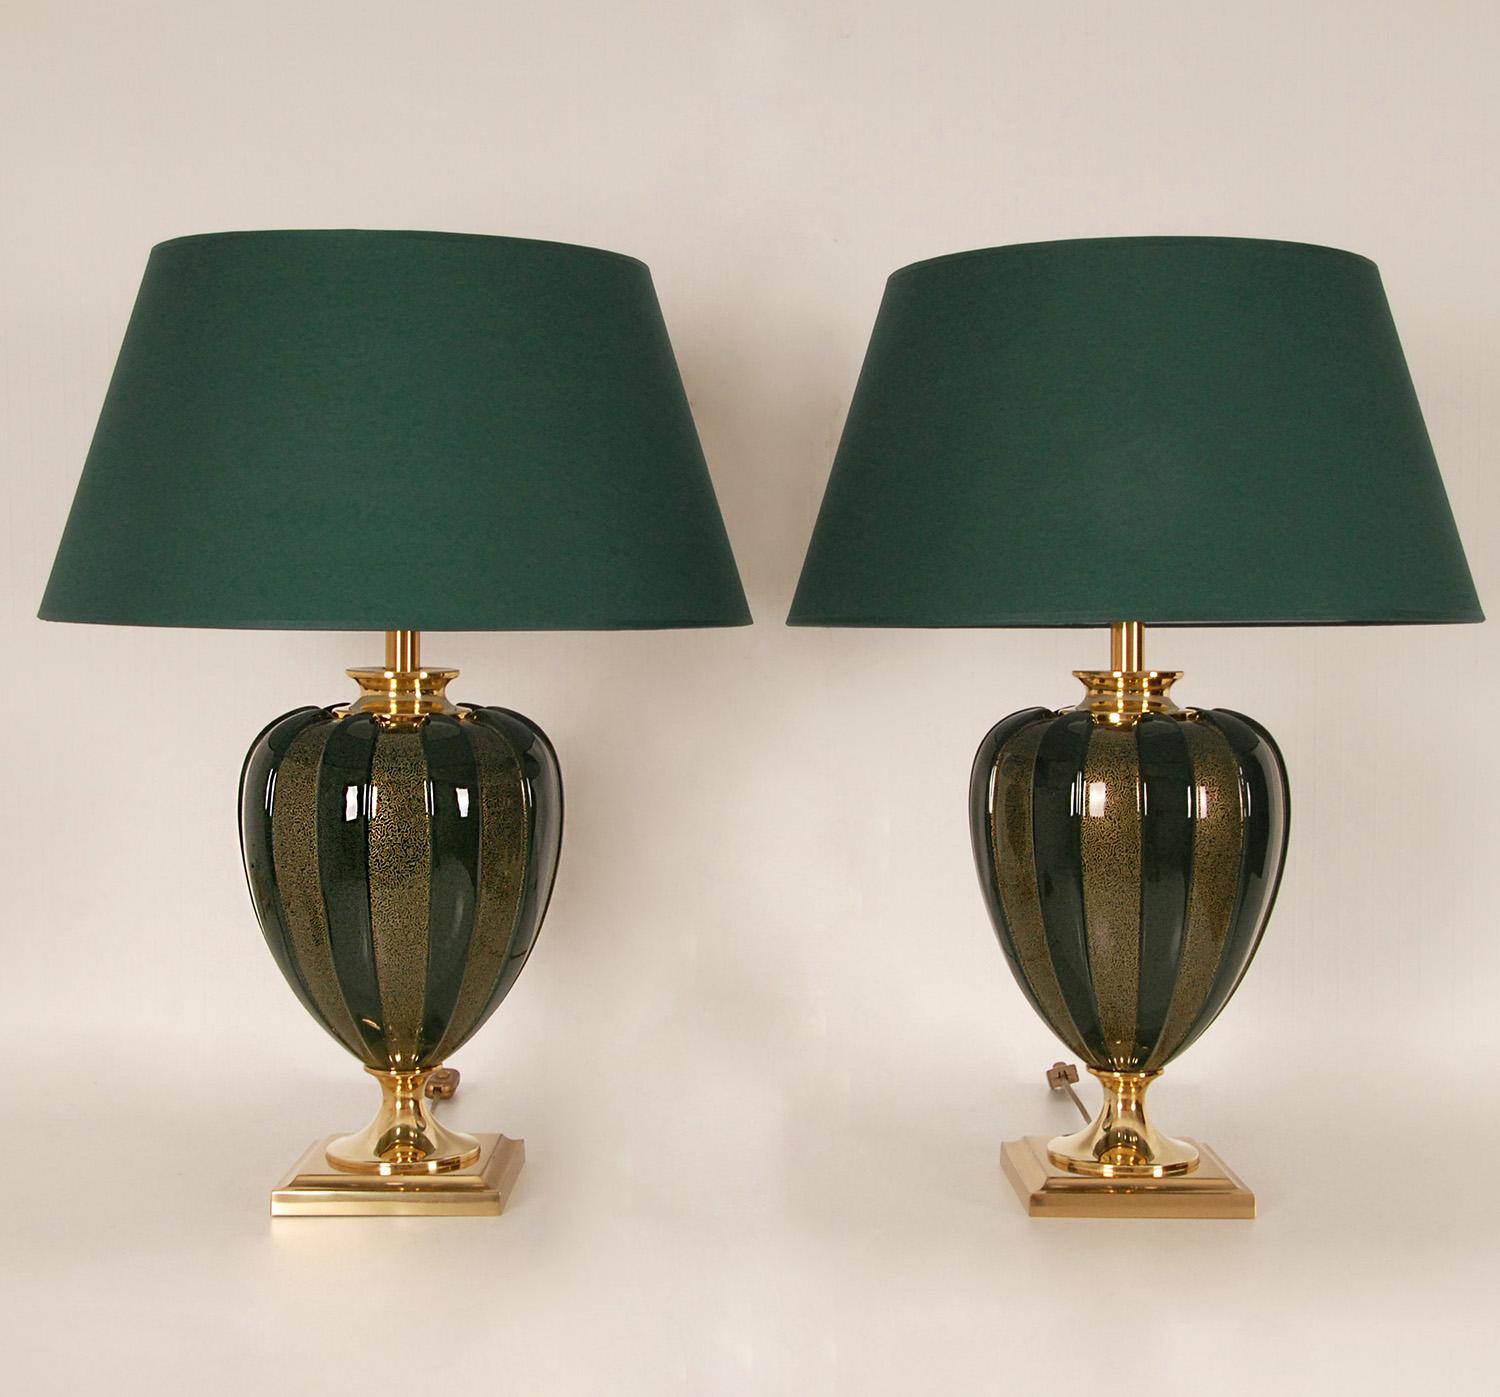 Vintage French Ceramic Lamps by Le Dauphin Empire Gold Green Table Lamps a Pair For Sale 1